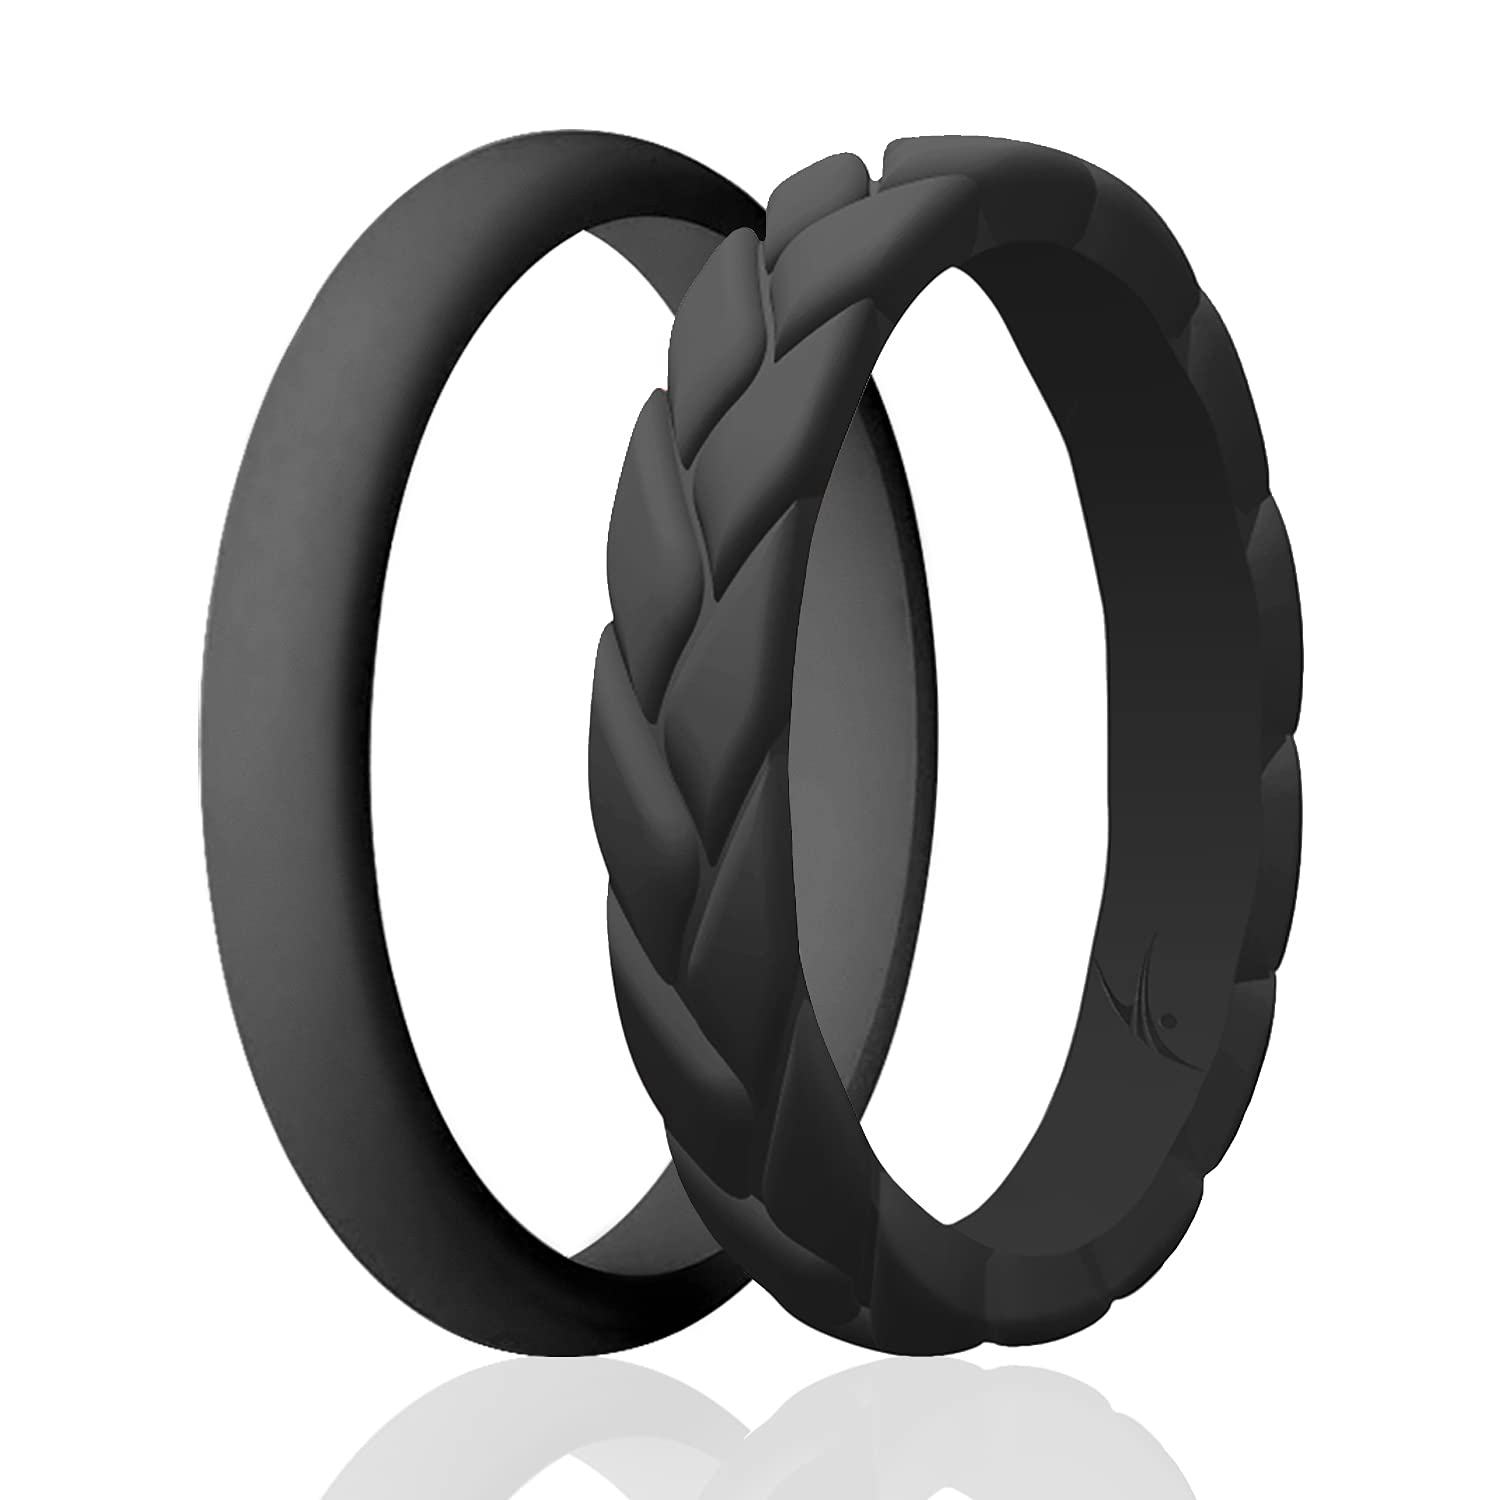 Roq Silicone Rubber Wedding Ring For Women, Thin Stackable Rubber Silicone Wedding Band, Bridal Jewelry Set, Anniversary Rings,